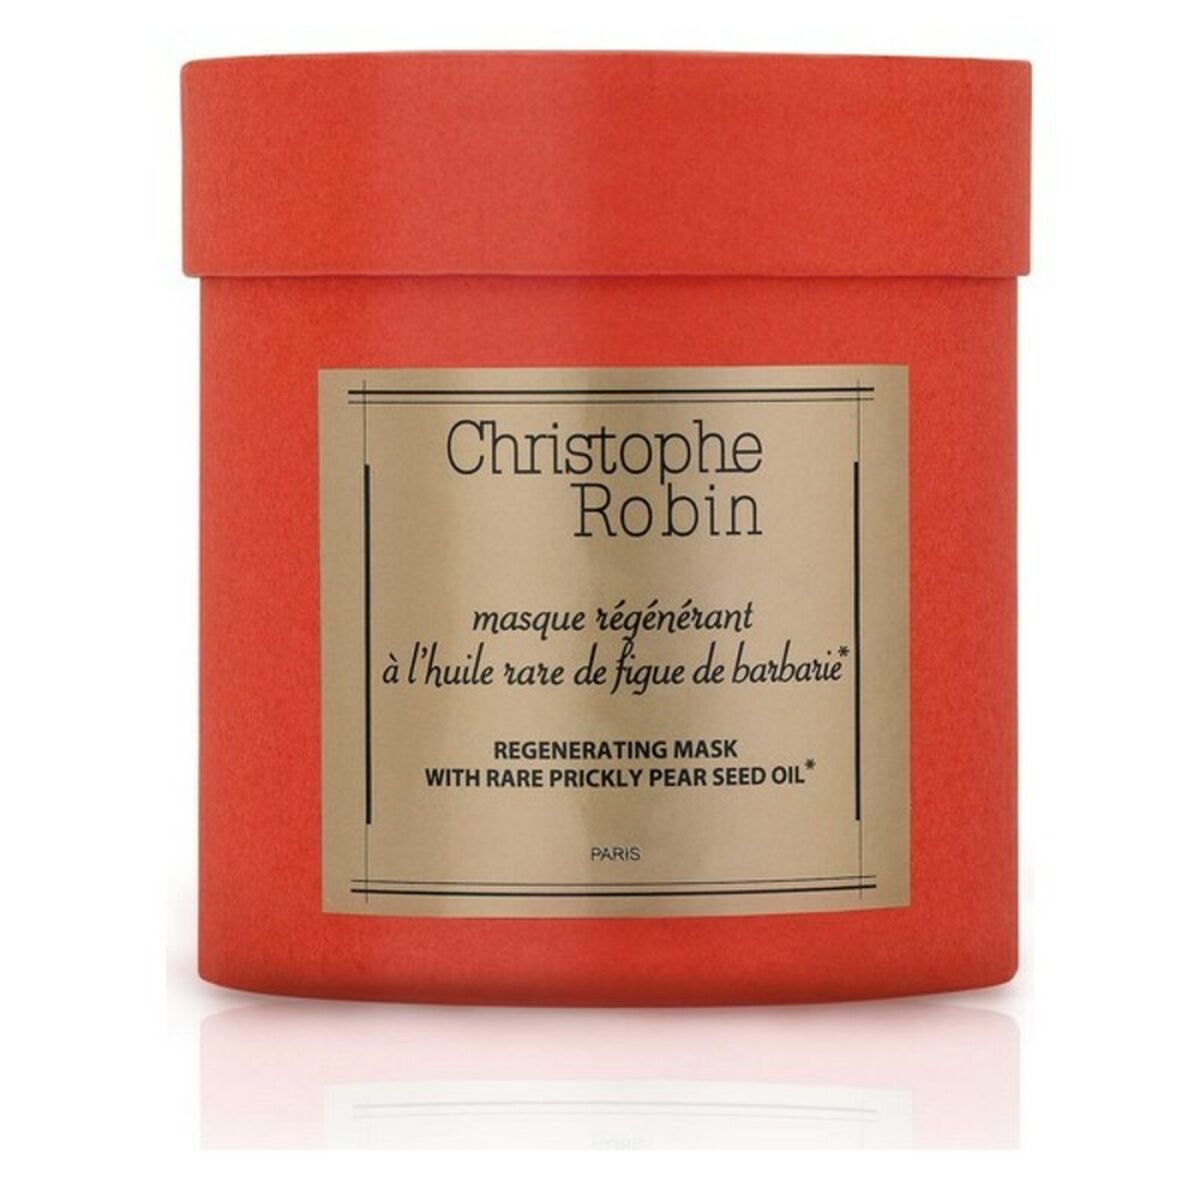 Cleansing and Regenerative Mask Christophe Robin 281-202